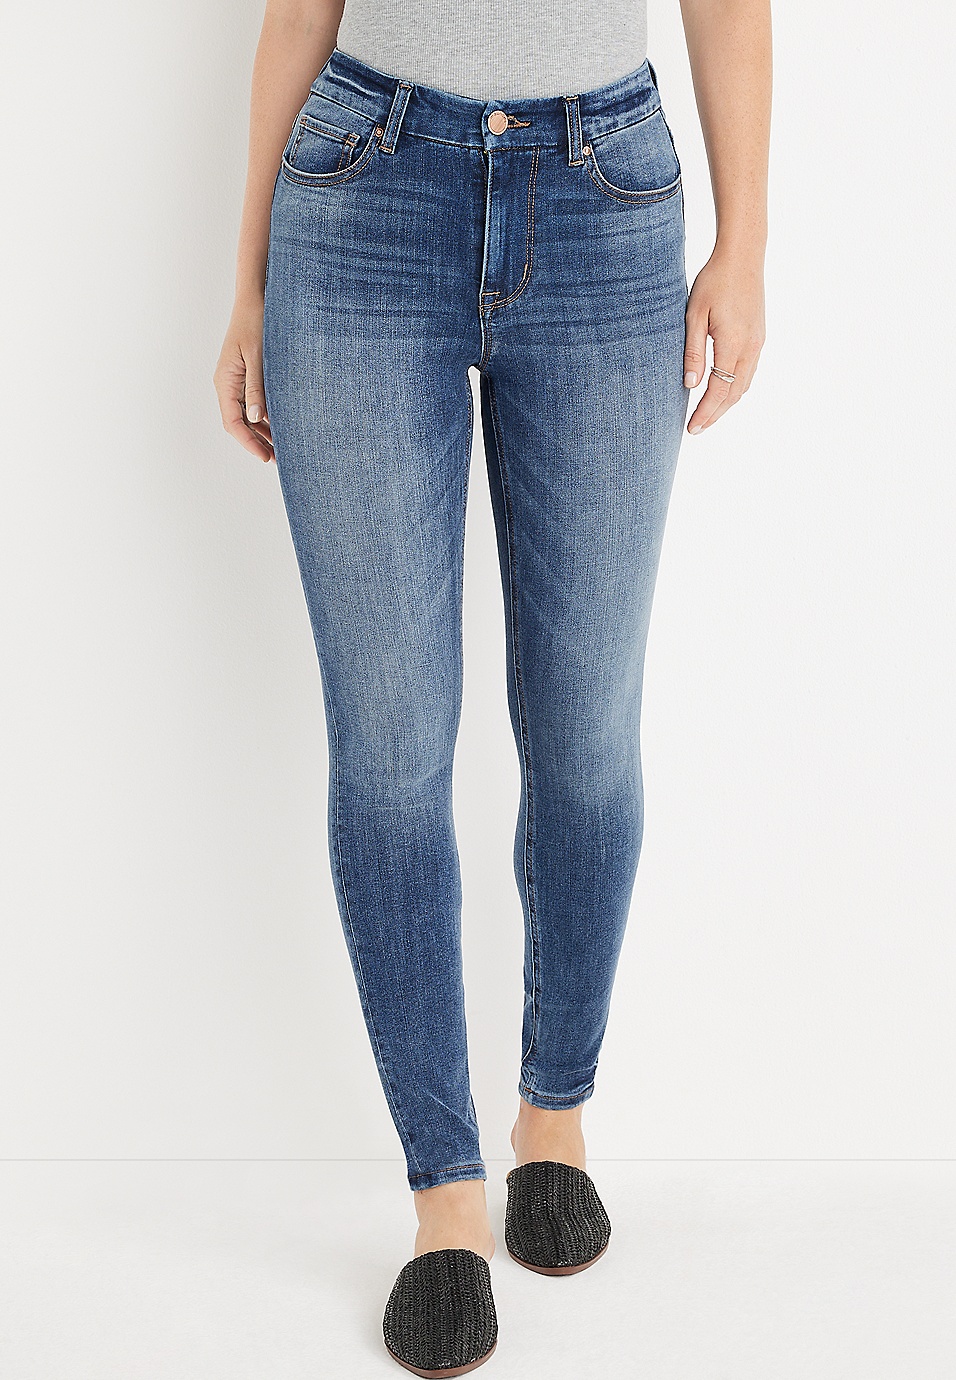 Aangepaste basketbal Laboratorium m jeans by maurices™ Limitless High Rise Jegging | maurices